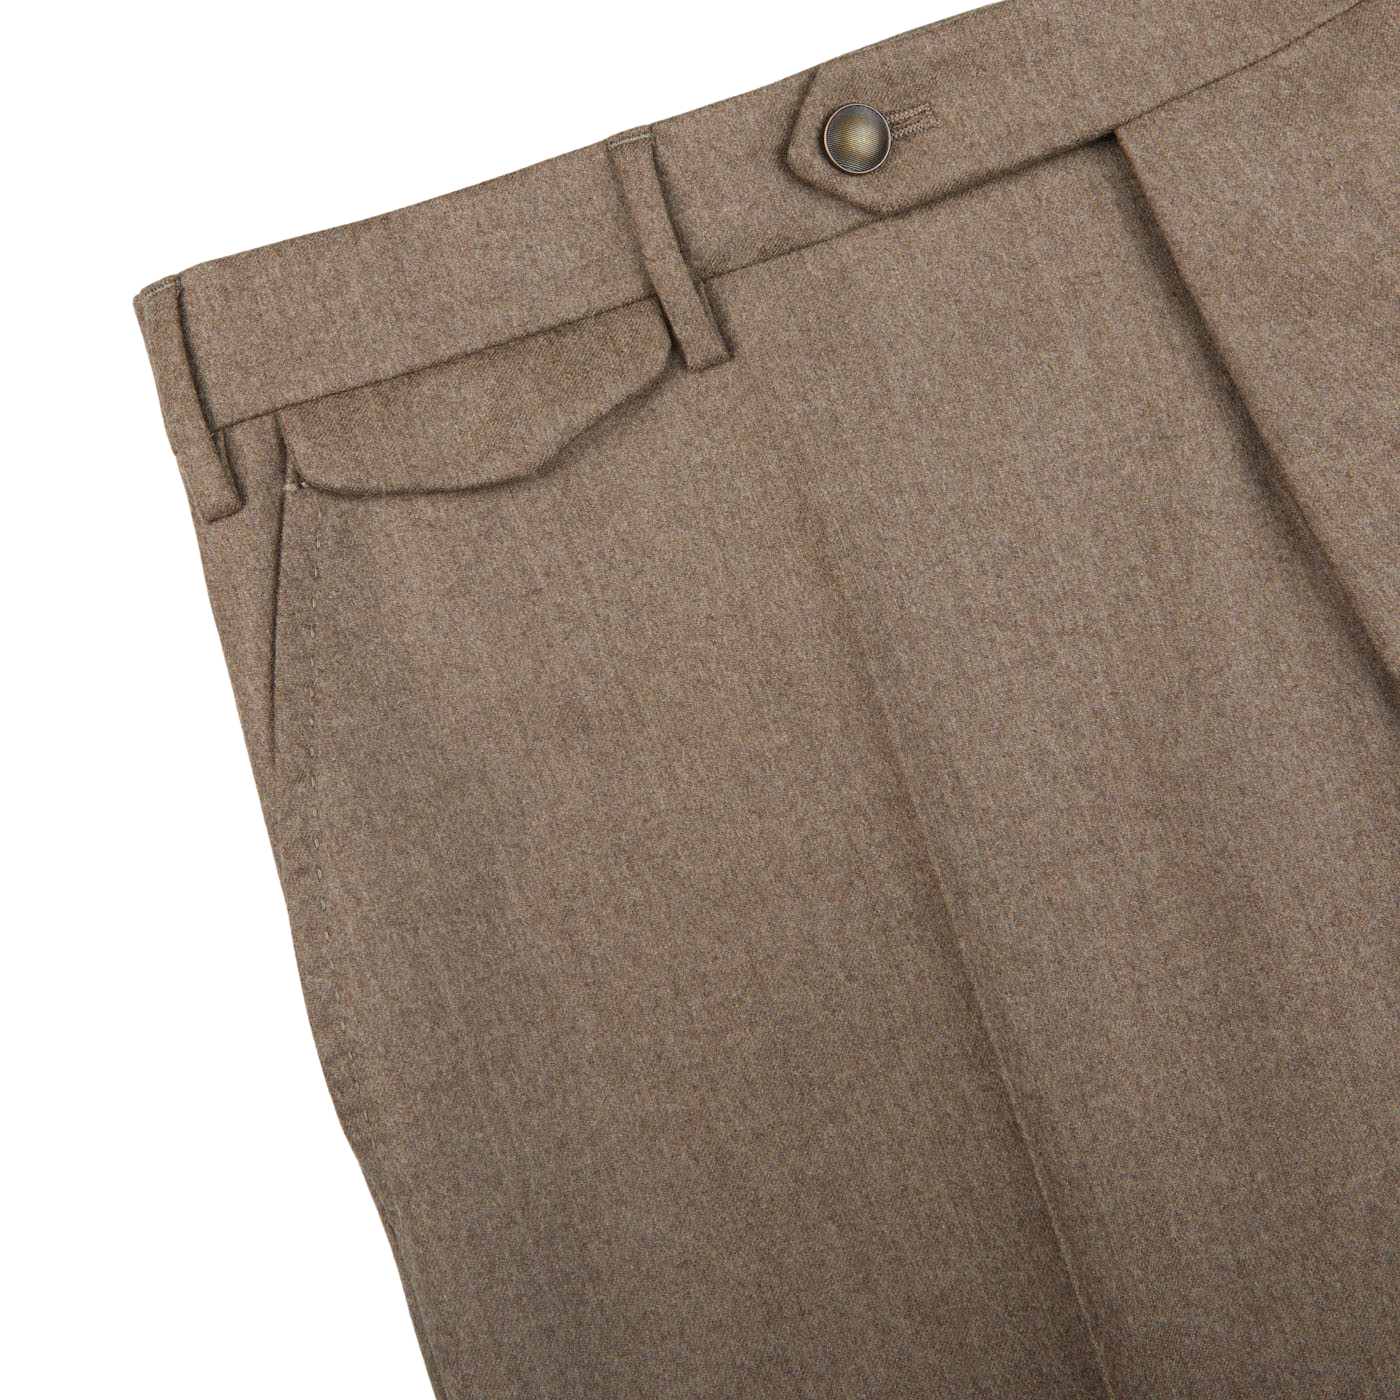 Buy Knighthood Solid Men Trousers (Beige) 38 at Amazon.in